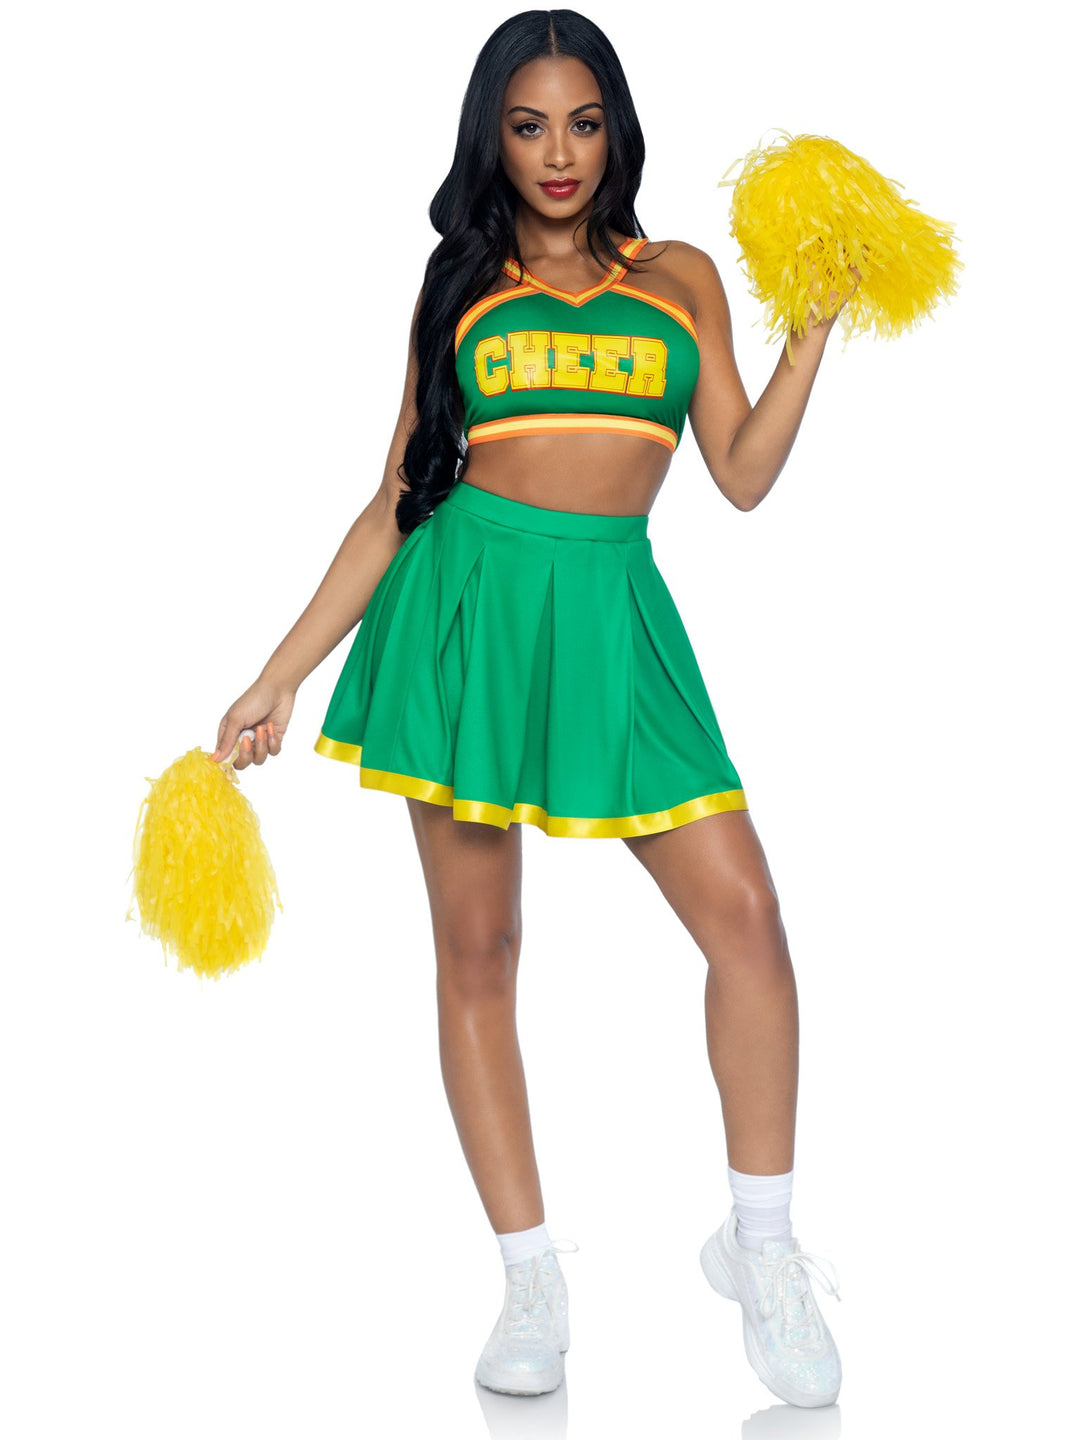 Bring It Baddie Cheer Crop Top and Pleated Skirt with Pom Poms